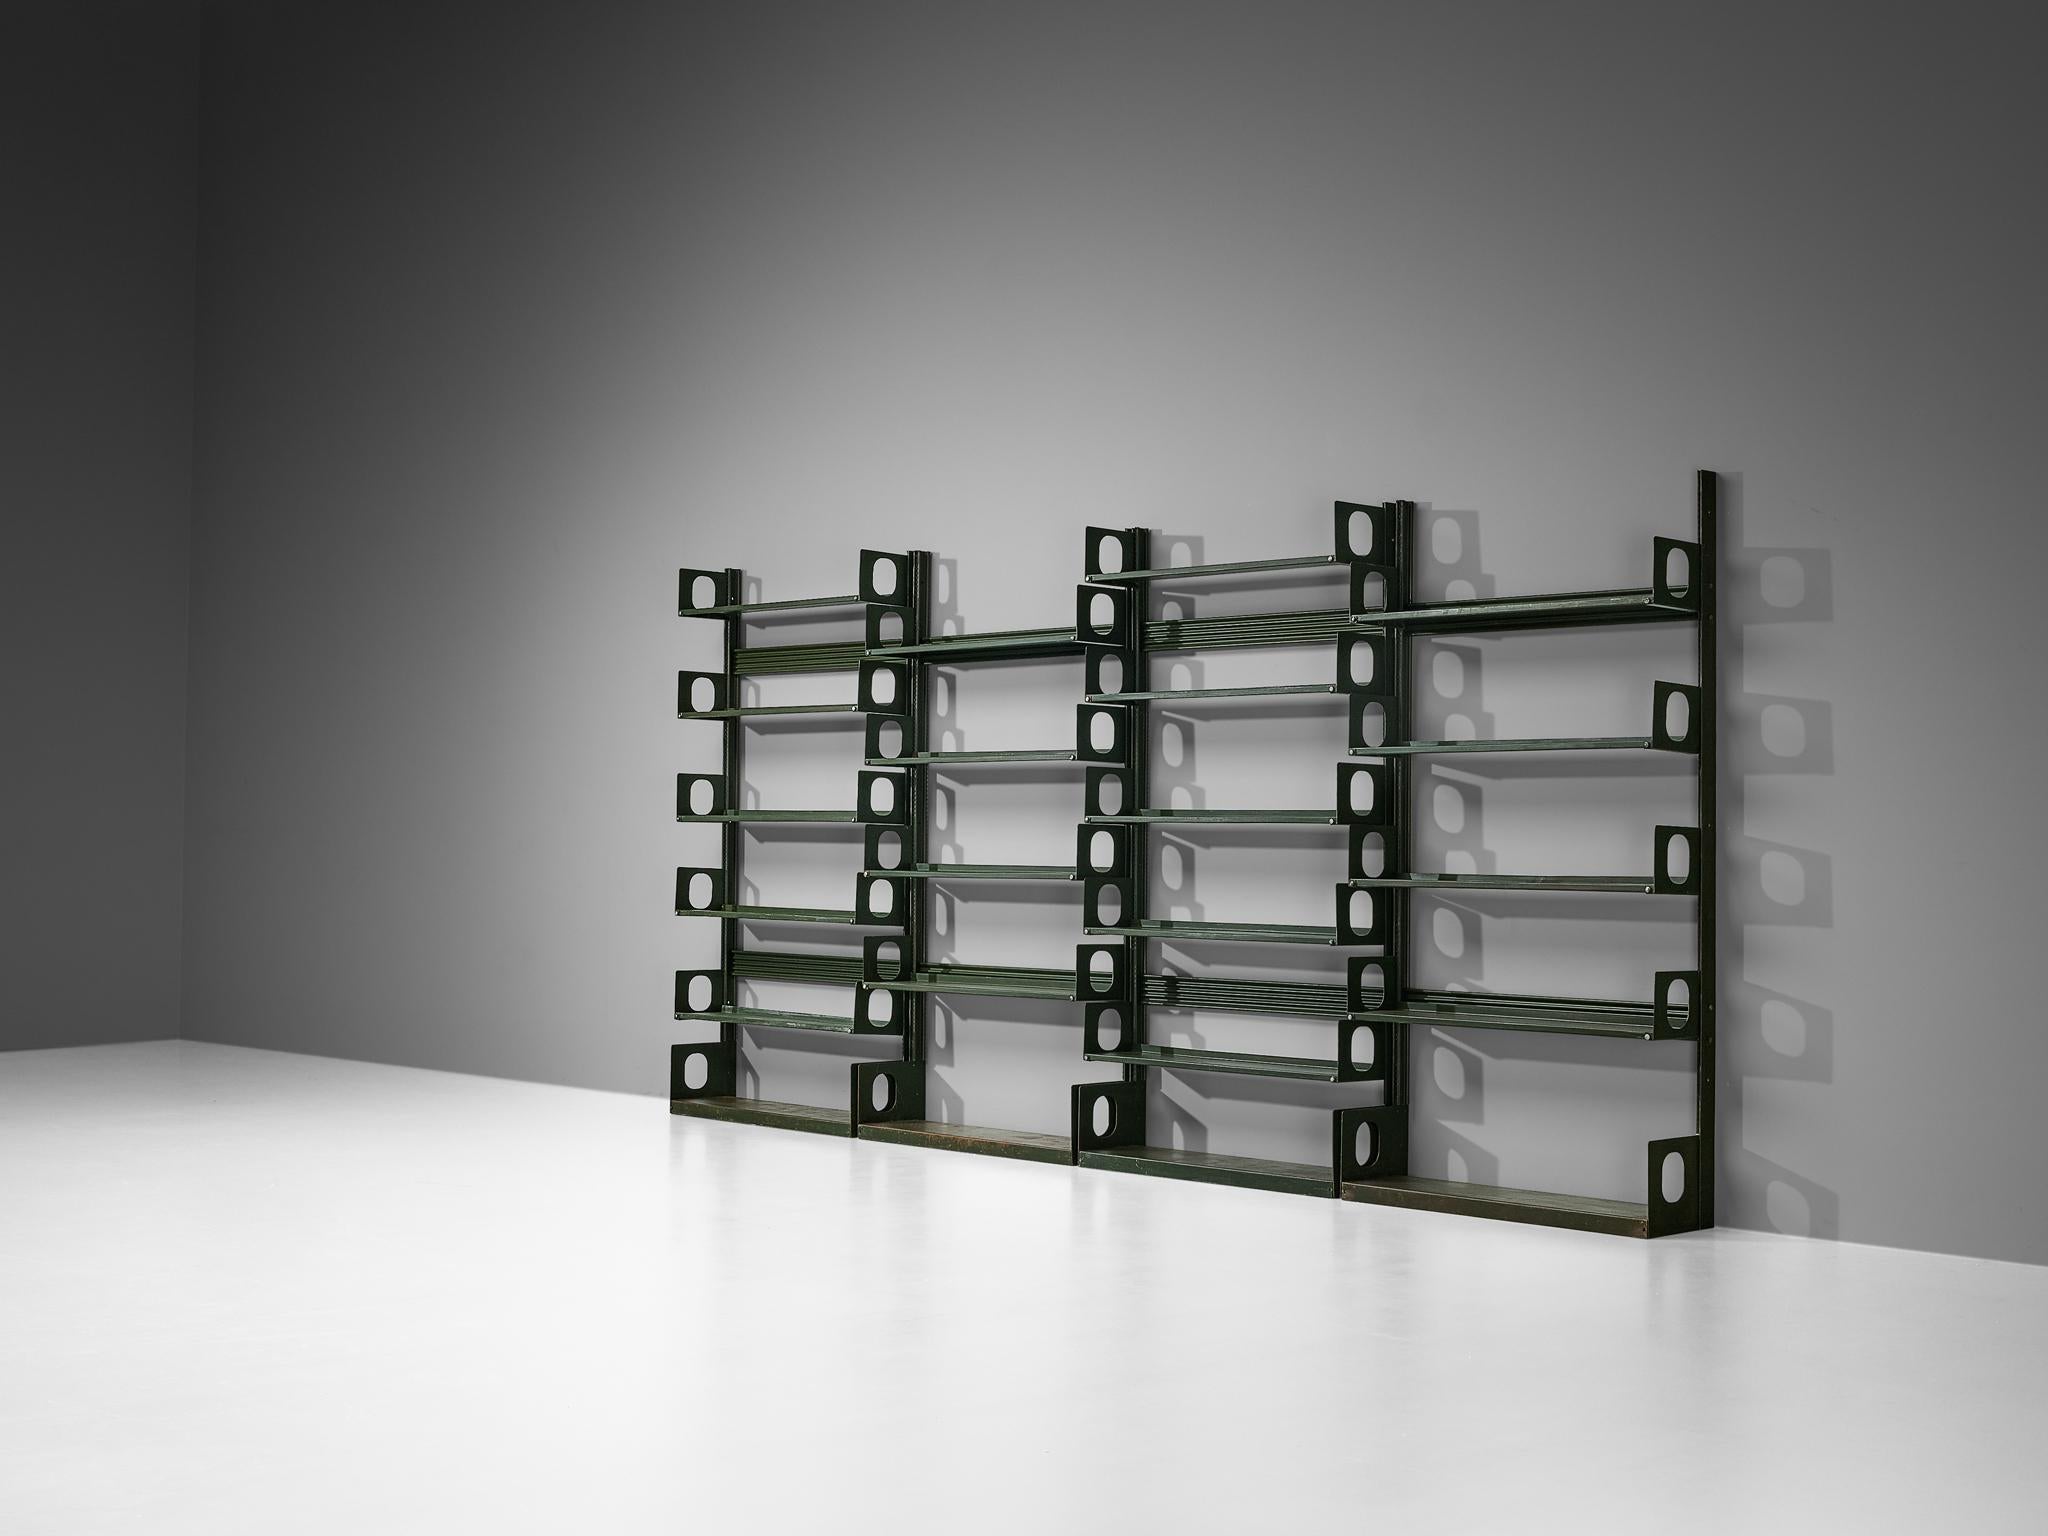 Lips Vago, 'Triennale' set of four shelving units or bookcases, dark green lacquered steel, Italy, design 1954

Constructed from steel sheets, the 'Triennale' bookcase or shelving unit is designed in 1954 for the Triennale Milano. A sturdy yet